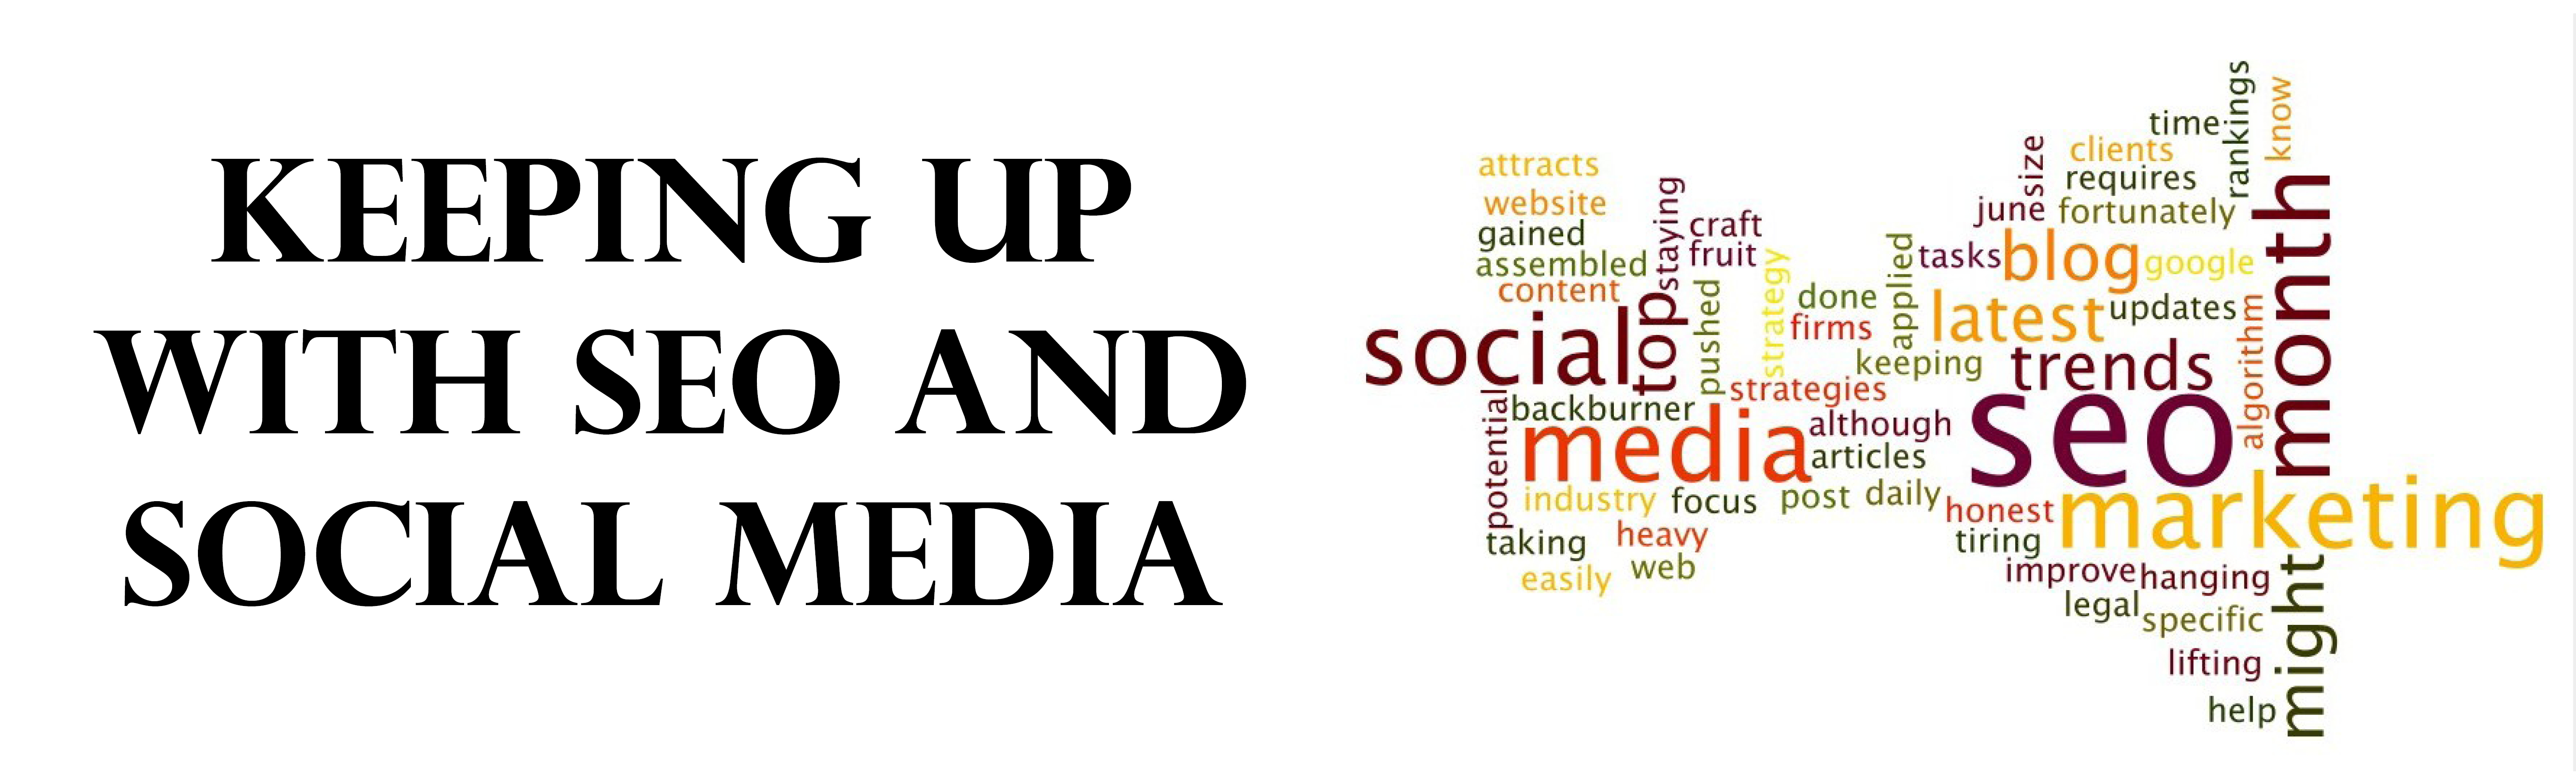 Keeping up with SEO and Social Media